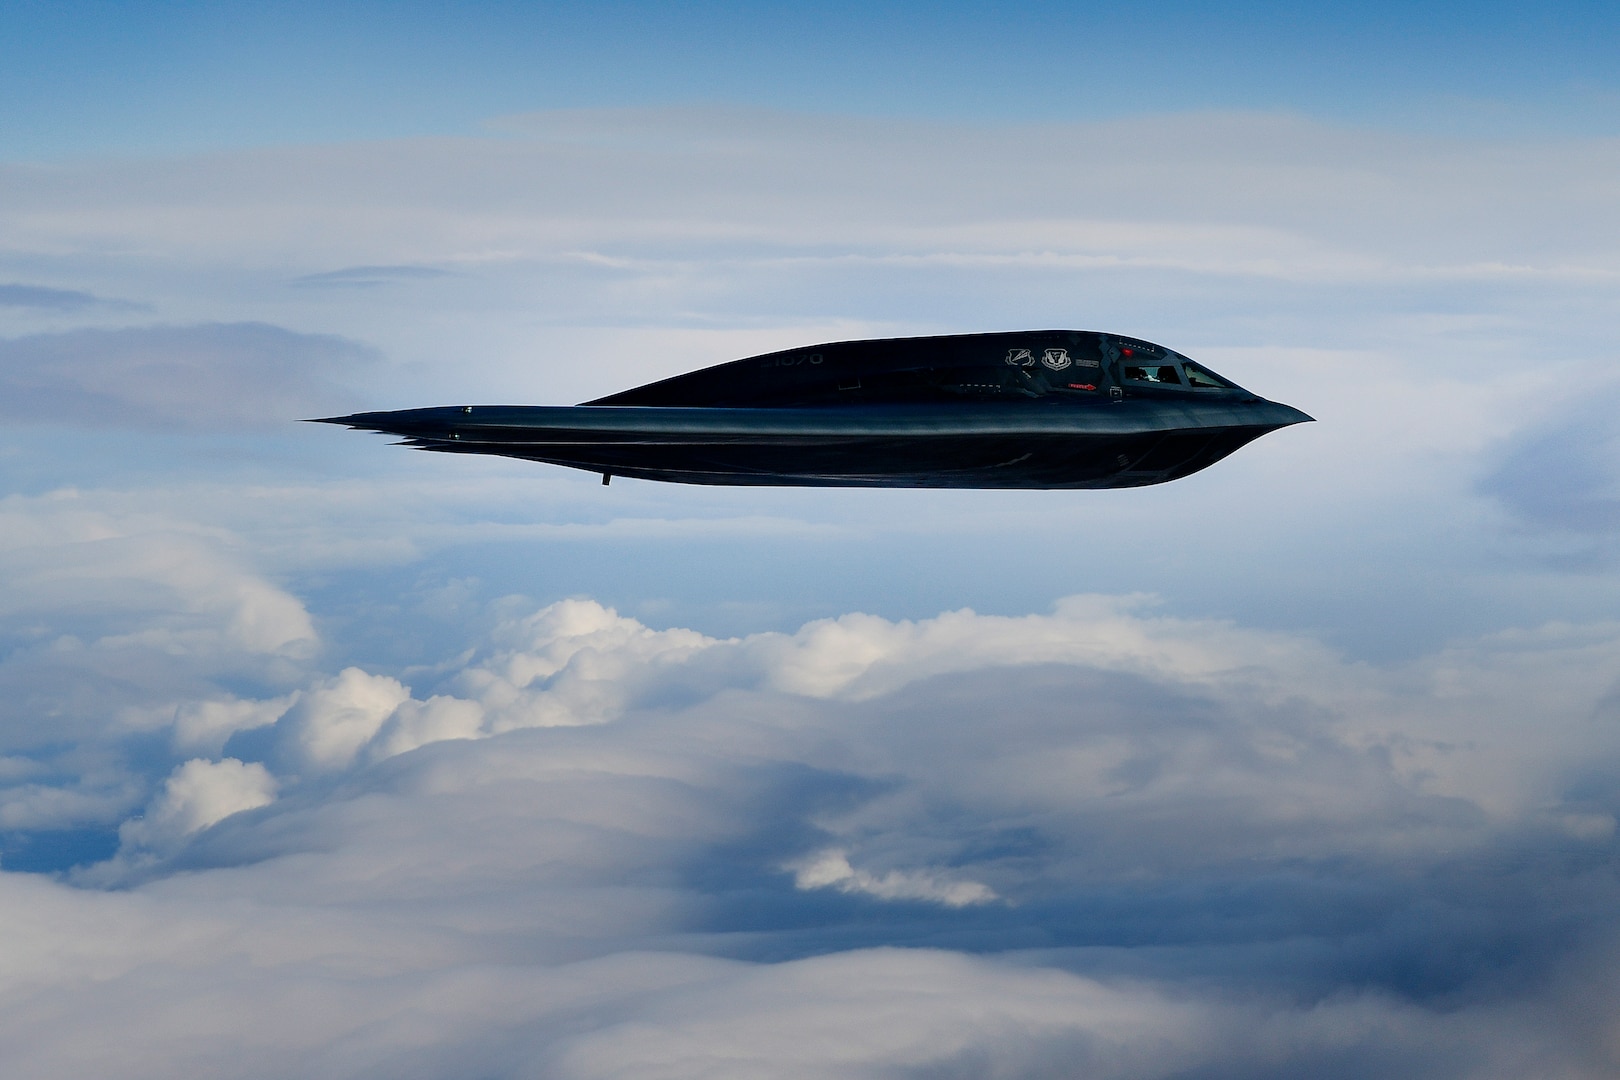 A B-2A Spirit bomber assigned to the 509th Bomb Wing conducts aerial operations in support of Bomber Task Force Europe 20-2 over the North Sea March 12, 2020. Bomber missions enable aircrews to maintain a high state of readiness and proficiency and validate U.S. global strike capability. (U.S. Air Force photo by Master Sgt. Matthew Plew)